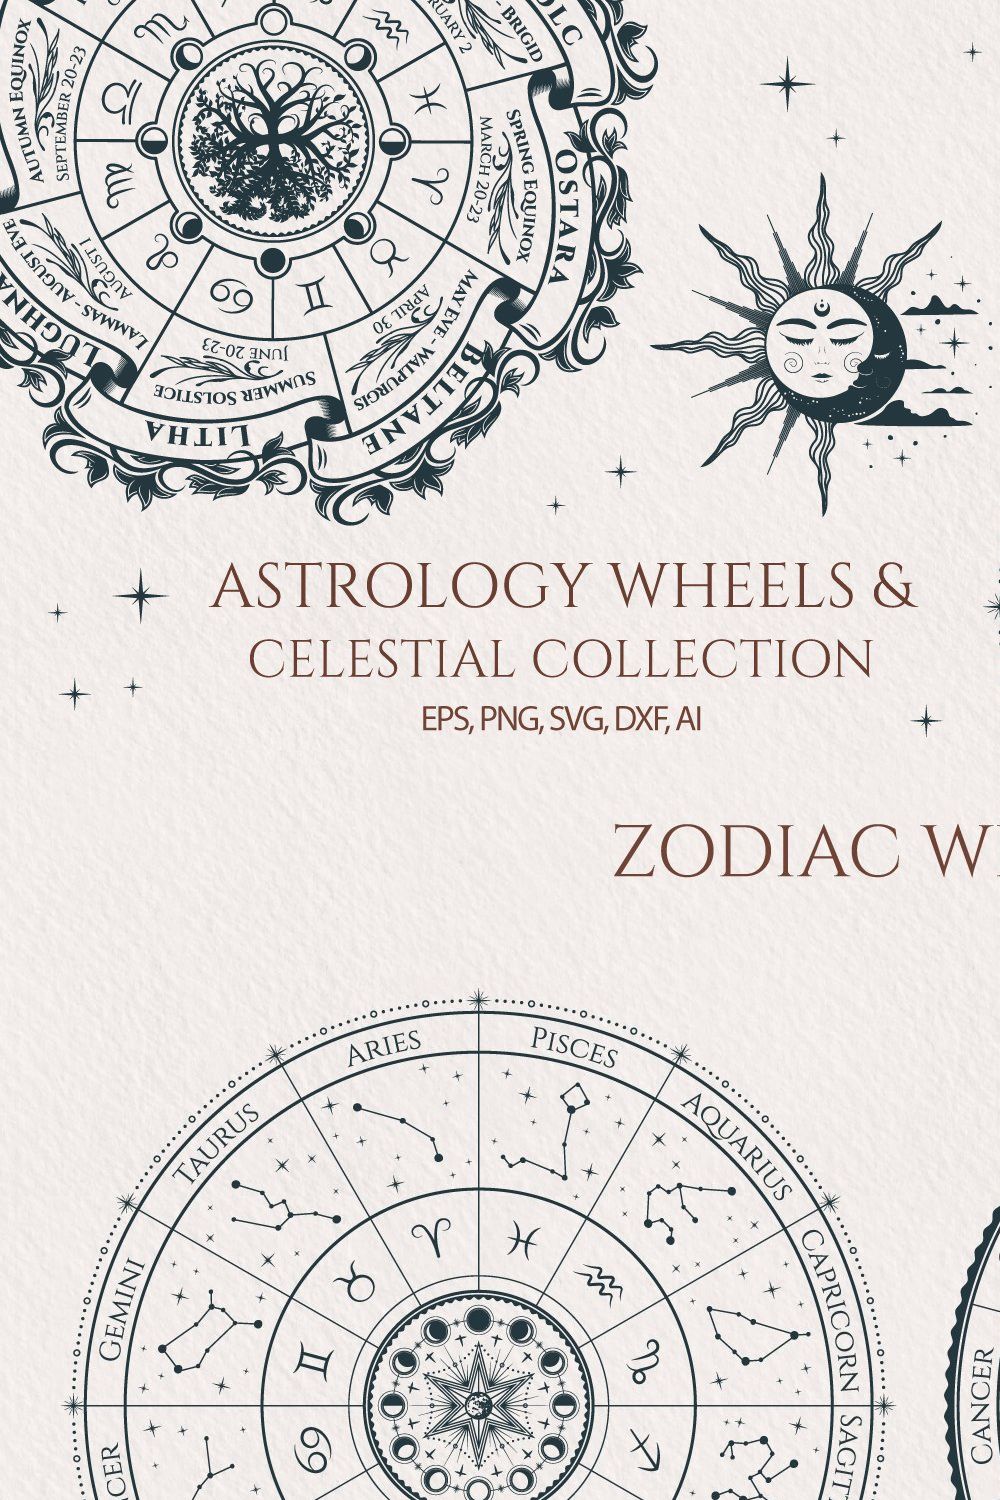 Zodiac Wheel & Wheel of the Year pinterest preview image.